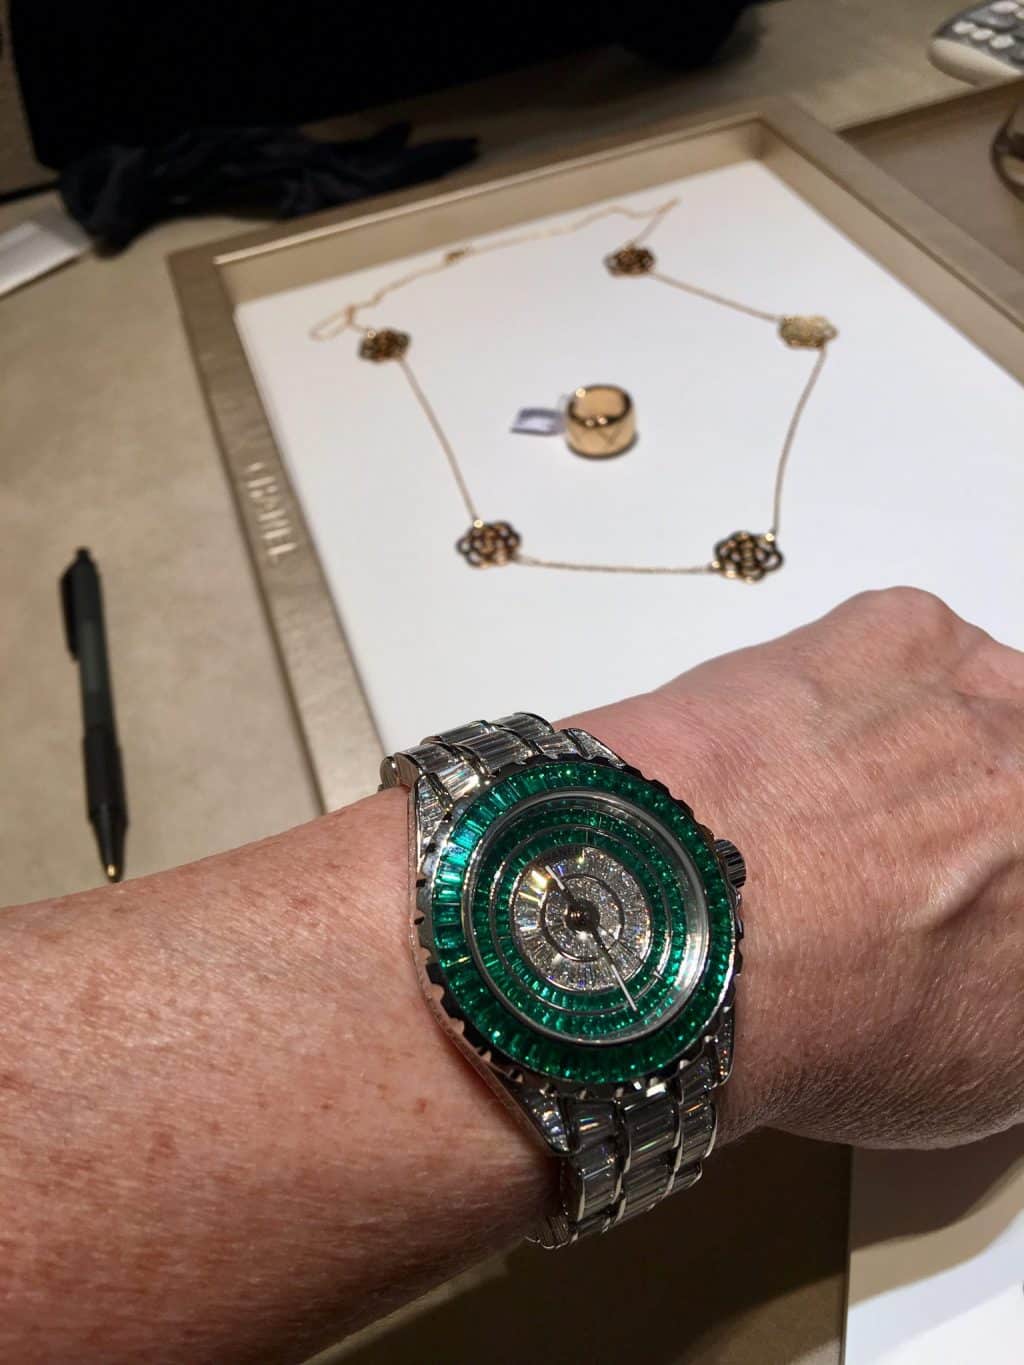 Chanel Paris. Hand is shaking with emerald watch!